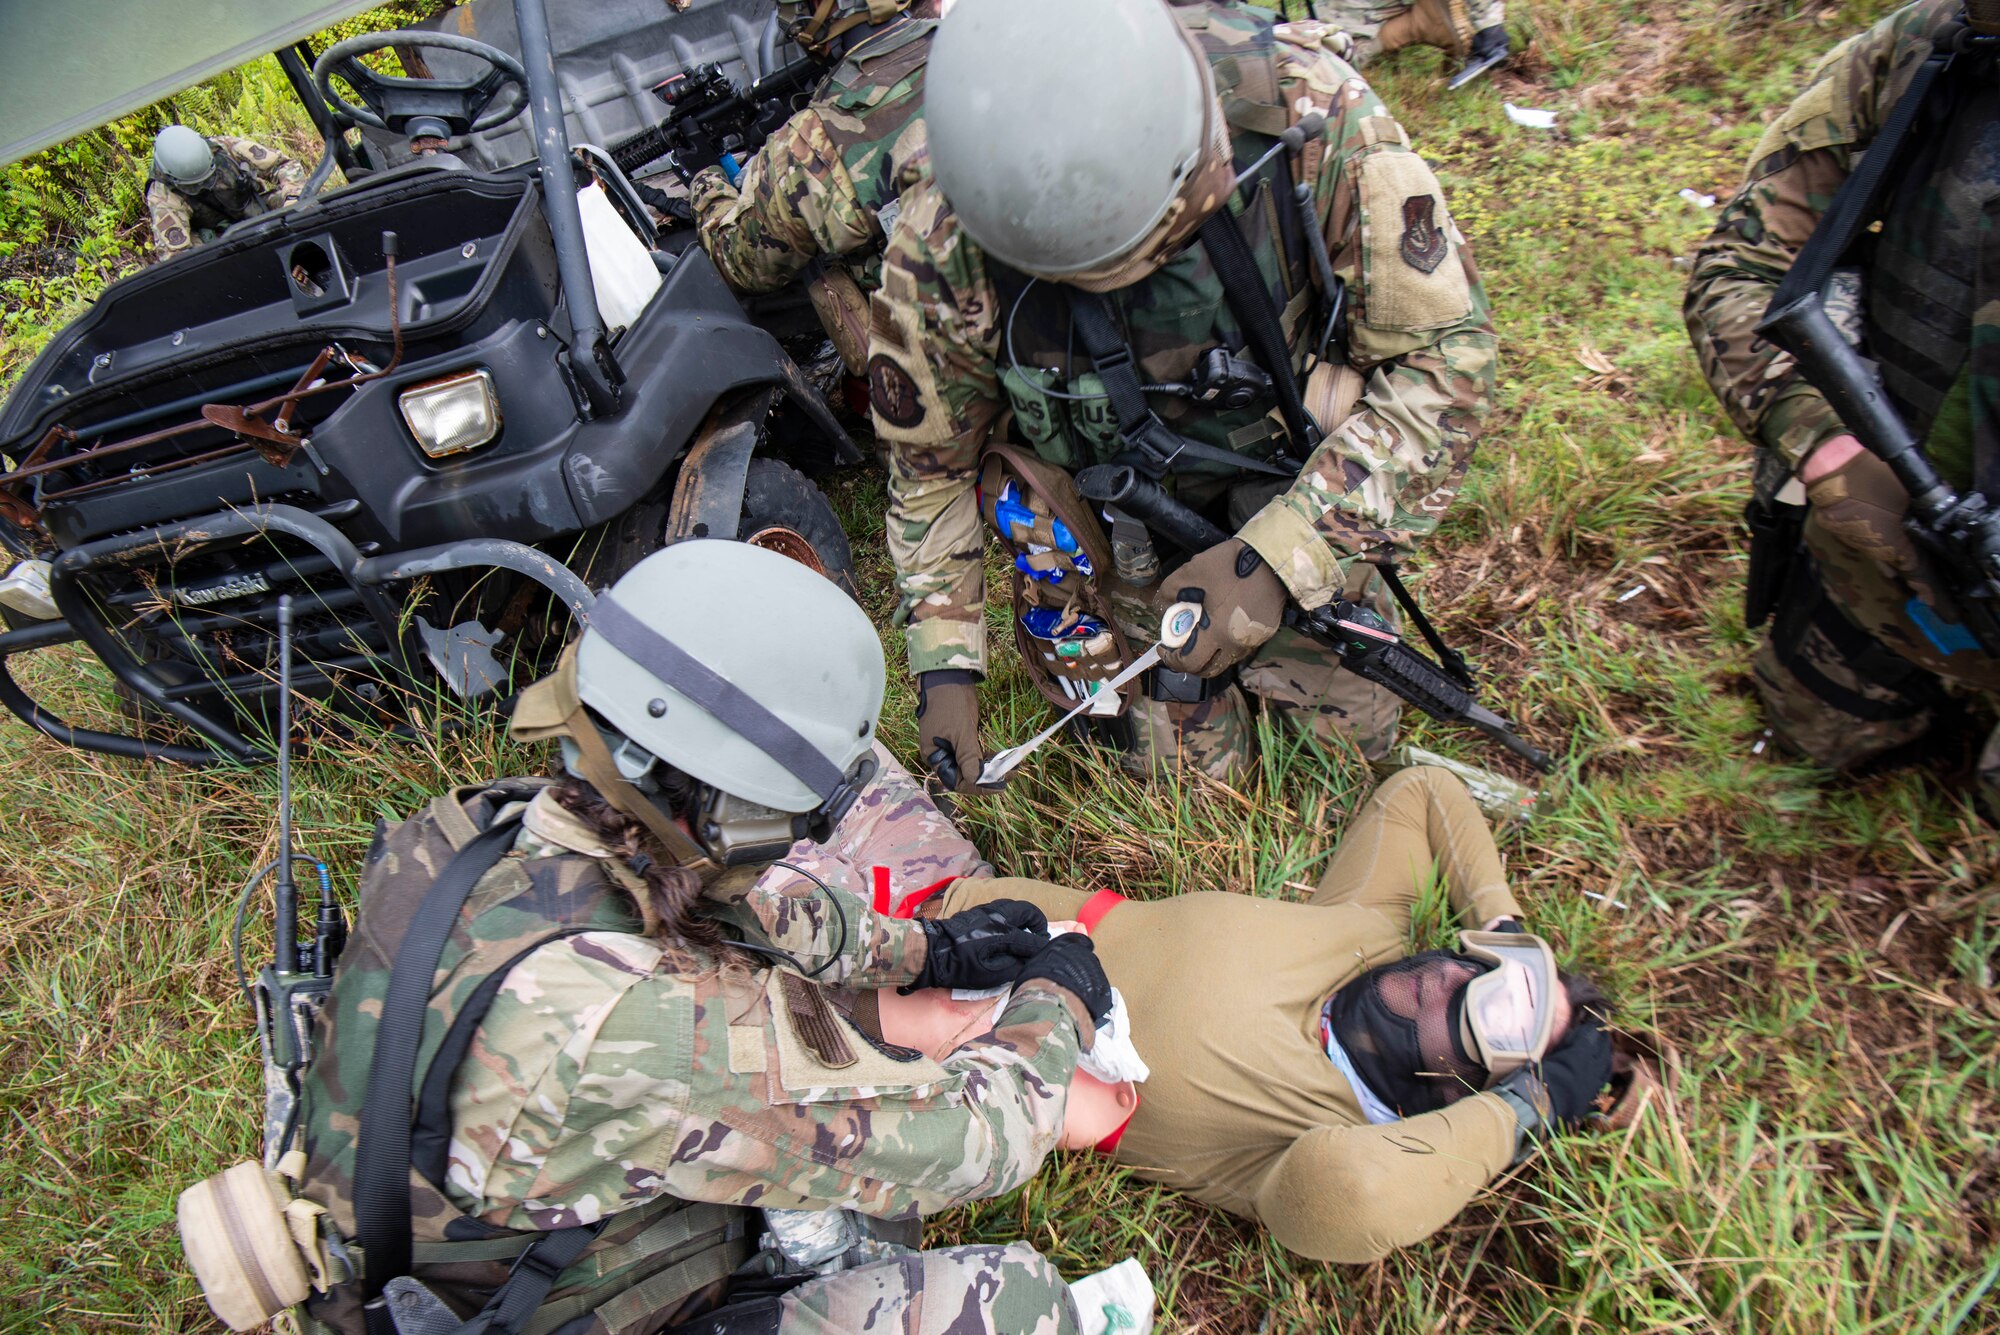 U.S. Air Force Airmen assigned to the 154th Fighter Wing, Hawaii Air National Guard perform simulated emergency field medical procedures during a combat readiness training course during Operation Pacific Iron 2021, July 20, 2021, at Andersen Air Force Base, Guam.